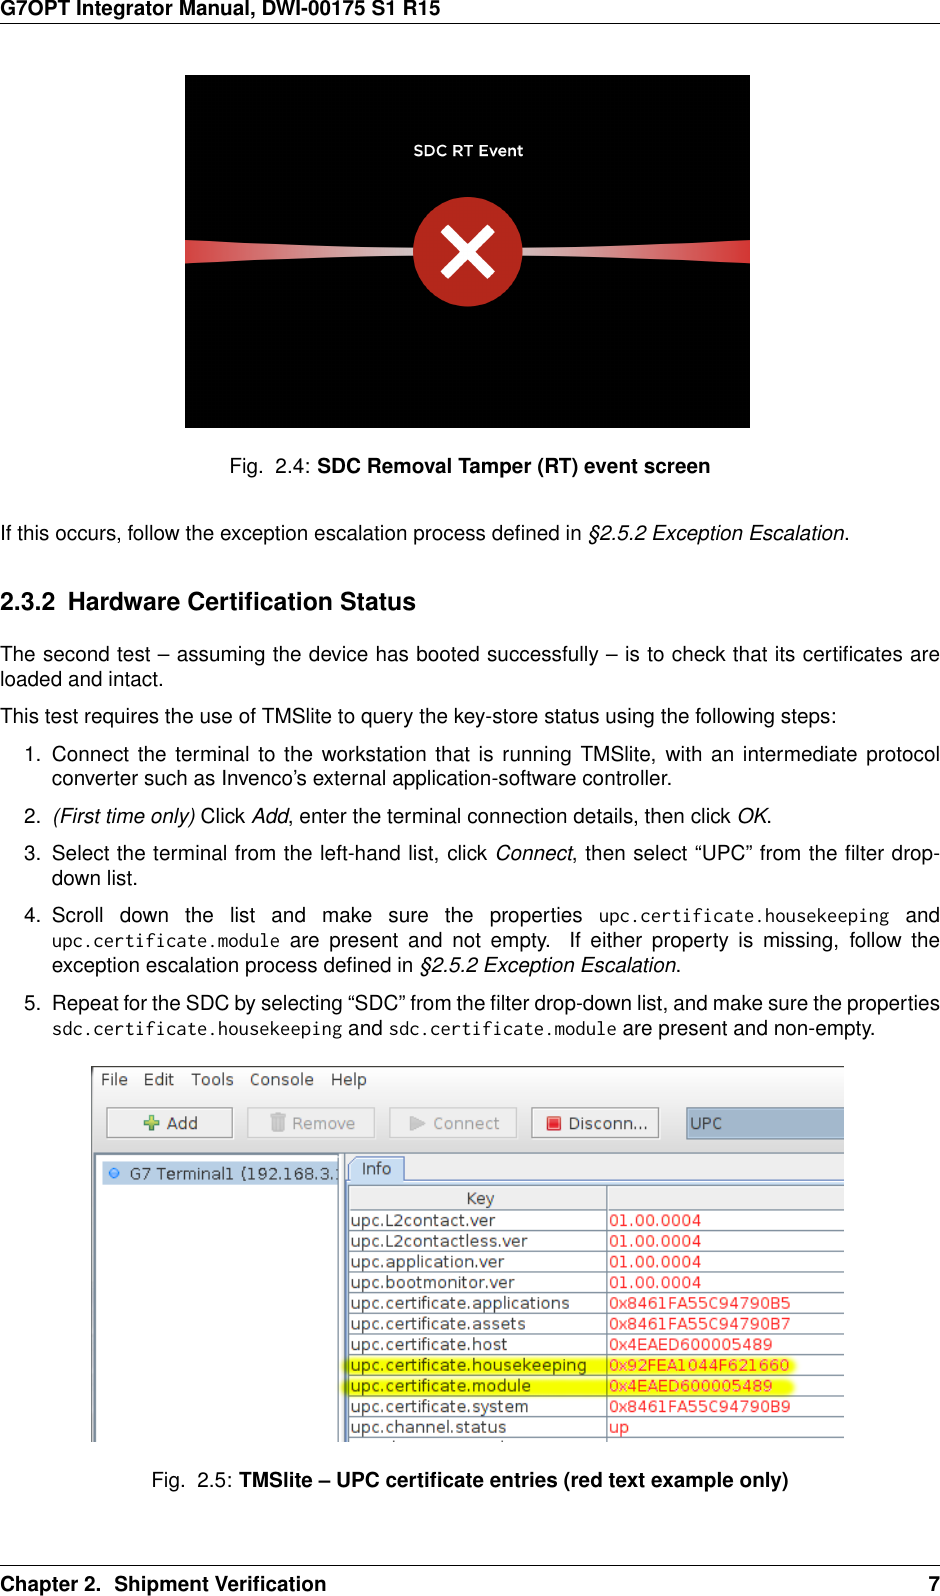 G7OPT Integrator Manual, DWI-00175 S1 R15Fig. 2.4: SDC Removal Tamper (RT) event screenIf this occurs, follow the exception escalation process deﬁned in §2.5.2 Exception Escalation.2.3.2 Hardware Certiﬁcation StatusThe second test – assuming the device has booted successfully – is to check that its certiﬁcates areloaded and intact.This test requires the use of TMSlite to query the key-store status using the following steps:1. Connect the terminal to the workstation that is running TMSlite, with an intermediate protocolconverter such as Invenco’s external application-software controller.2. (First time only) Click Add, enter the terminal connection details, then click OK.3. Select the terminal from the left-hand list, click Connect, then select “UPC” from the ﬁlter drop-down list.4. Scroll down the list and make sure the properties upc.certificate.housekeeping andupc.certificate.module are present and not empty. If either property is missing, follow theexception escalation process deﬁned in §2.5.2 Exception Escalation.5. Repeat for the SDC by selecting “SDC” from the ﬁlter drop-down list, and make sure the propertiessdc.certificate.housekeeping and sdc.certificate.module are present and non-empty.Fig. 2.5: TMSlite – UPC certiﬁcate entries (red text example only)Chapter 2. Shipment Veriﬁcation 7